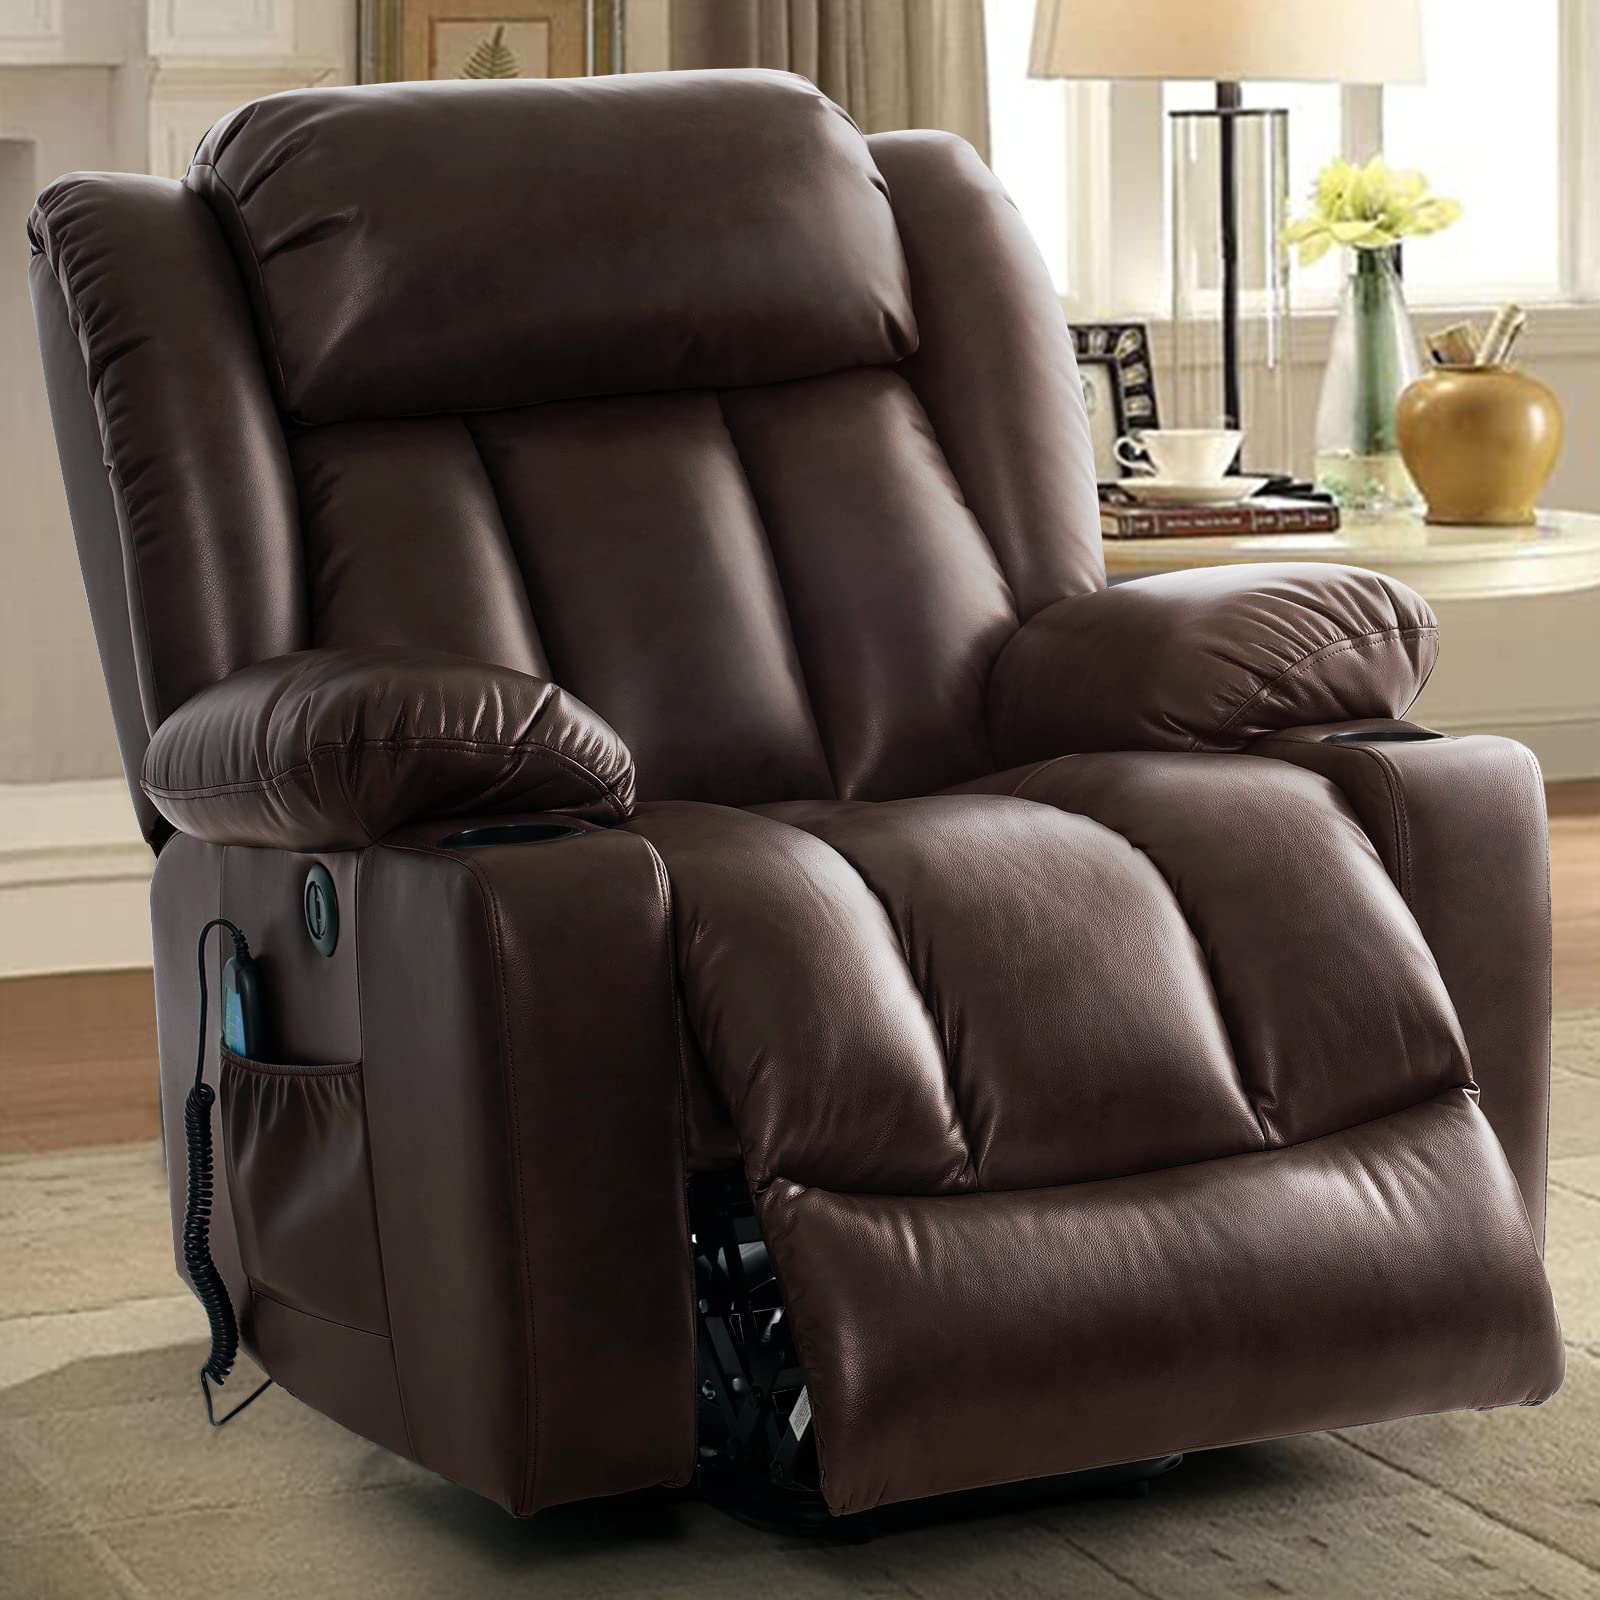 COOSLEEP Large Power Lift Recliner Chair with Massage and Heat for Elderly